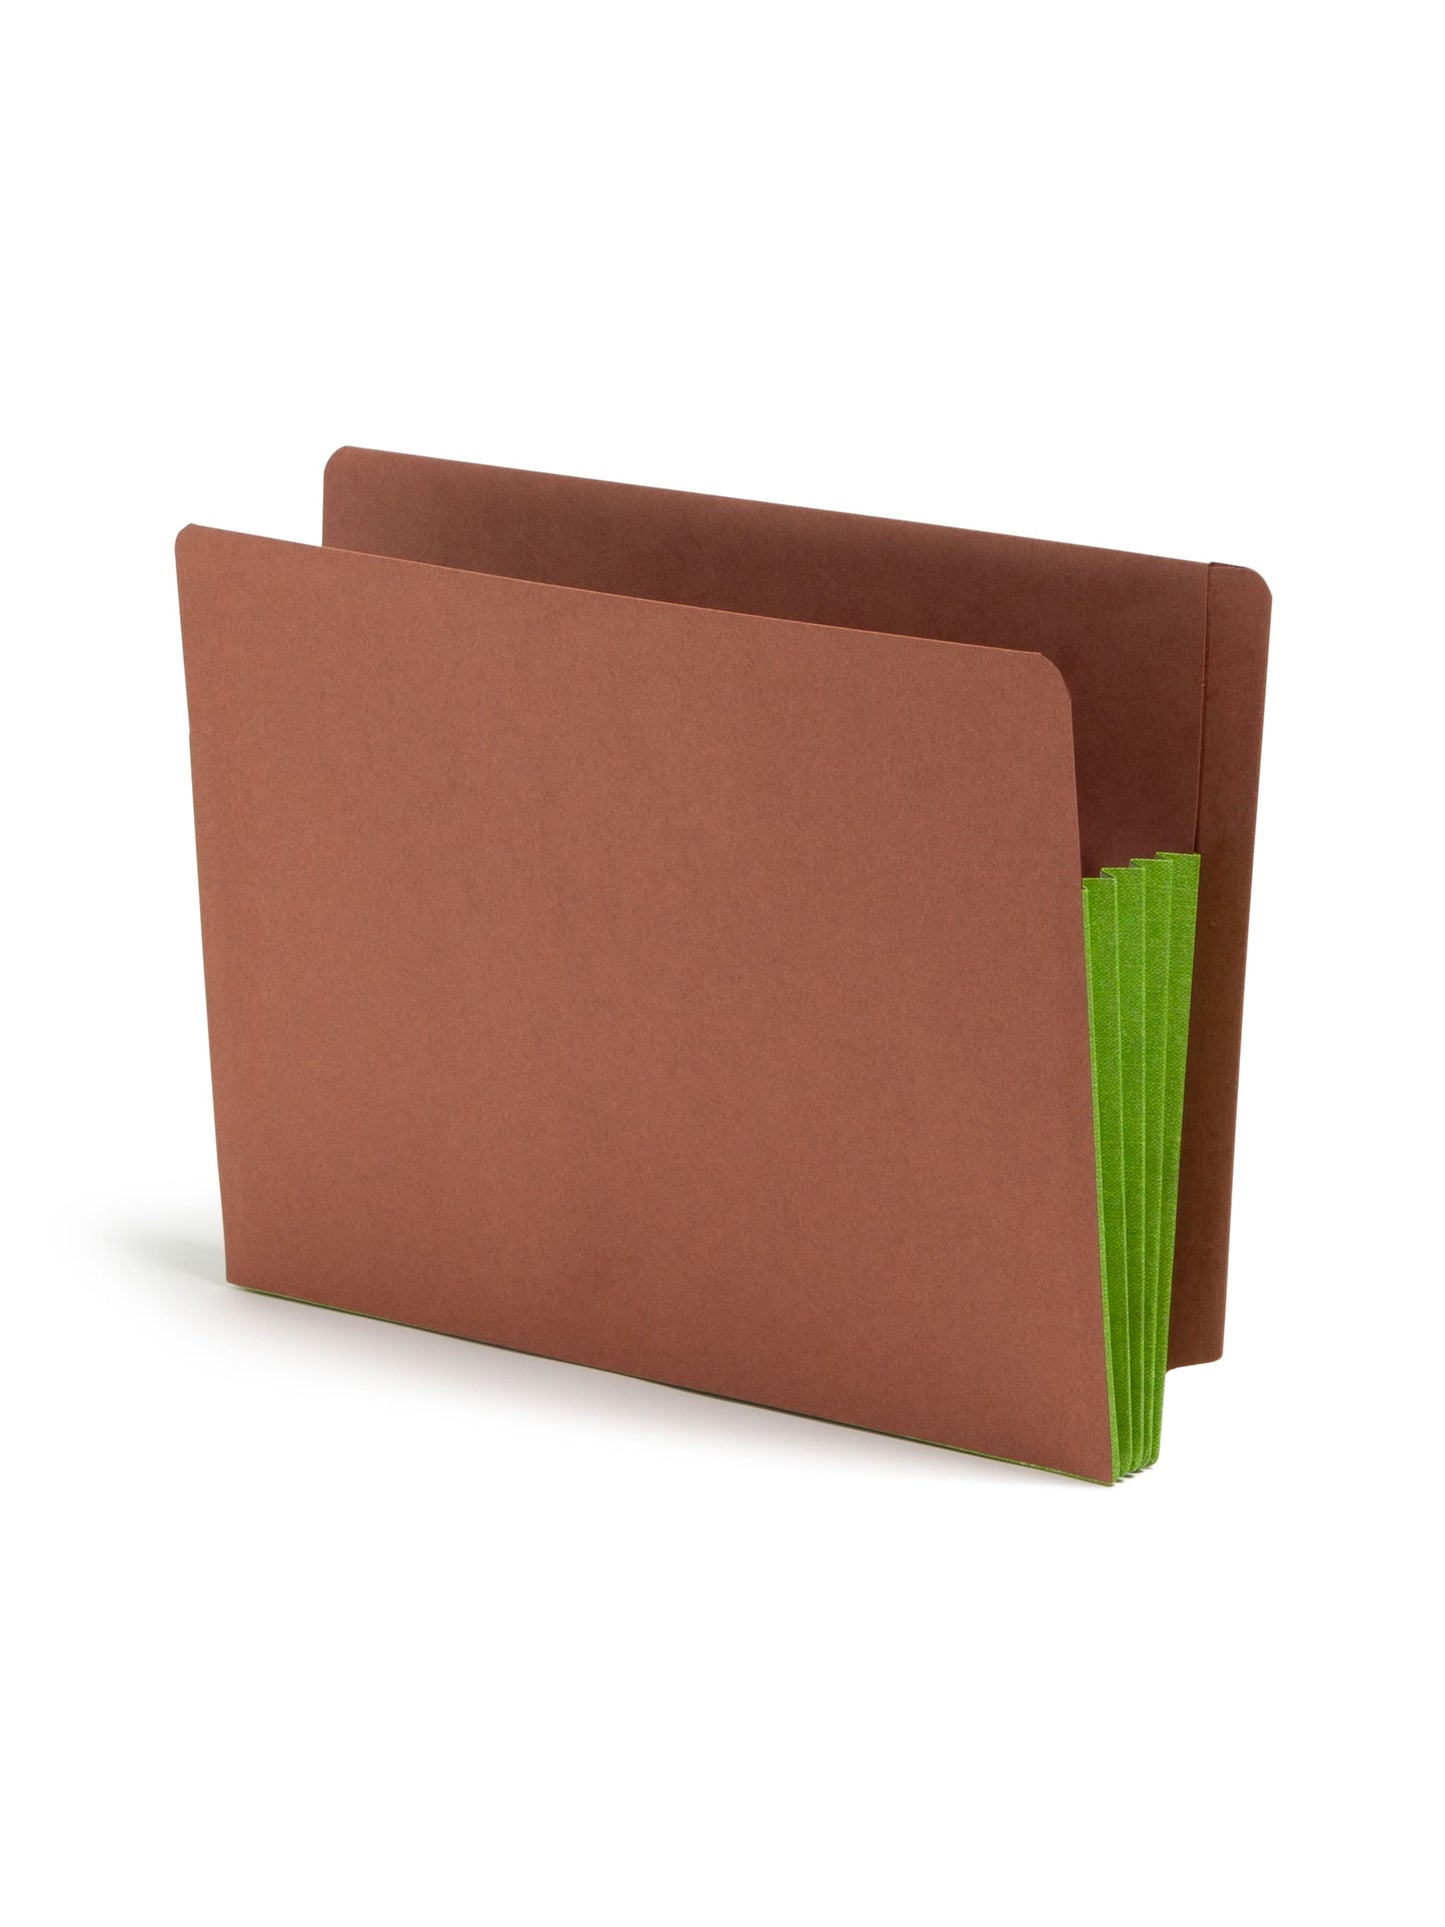 Reinforced End Tab File Pockets, Straight-Cut Tab, 3-1/2 inch Expansion, Green Color, Extra Wide Letter Size, Set of 0, 30086486736801